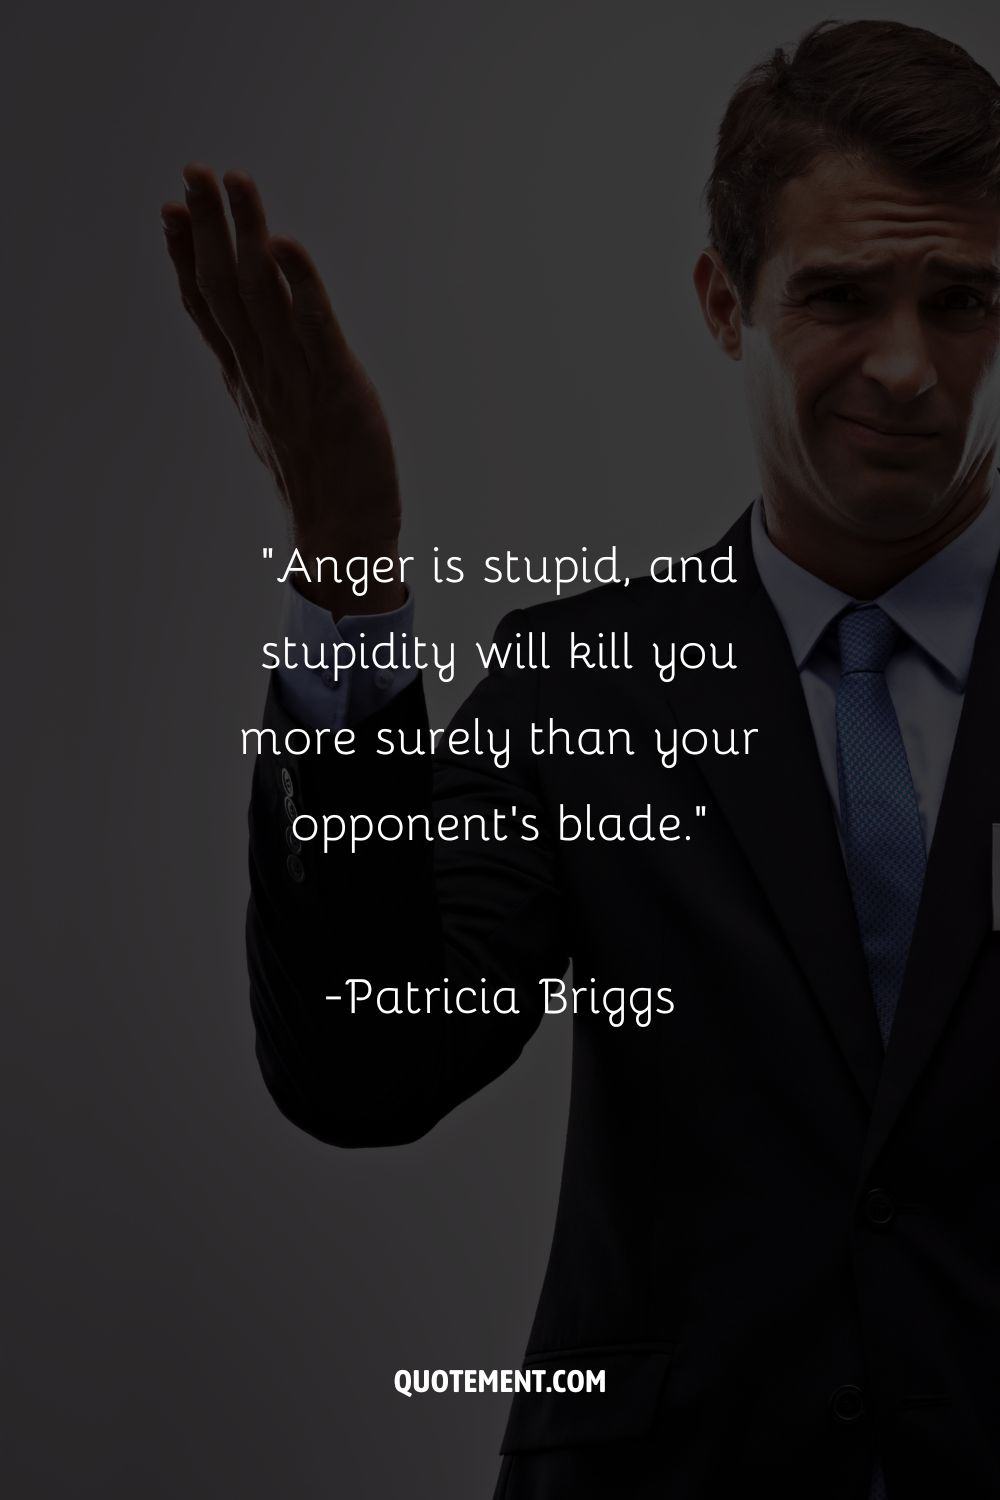 “Anger is stupid, and stupidity will kill you more surely than your opponent's blade.”